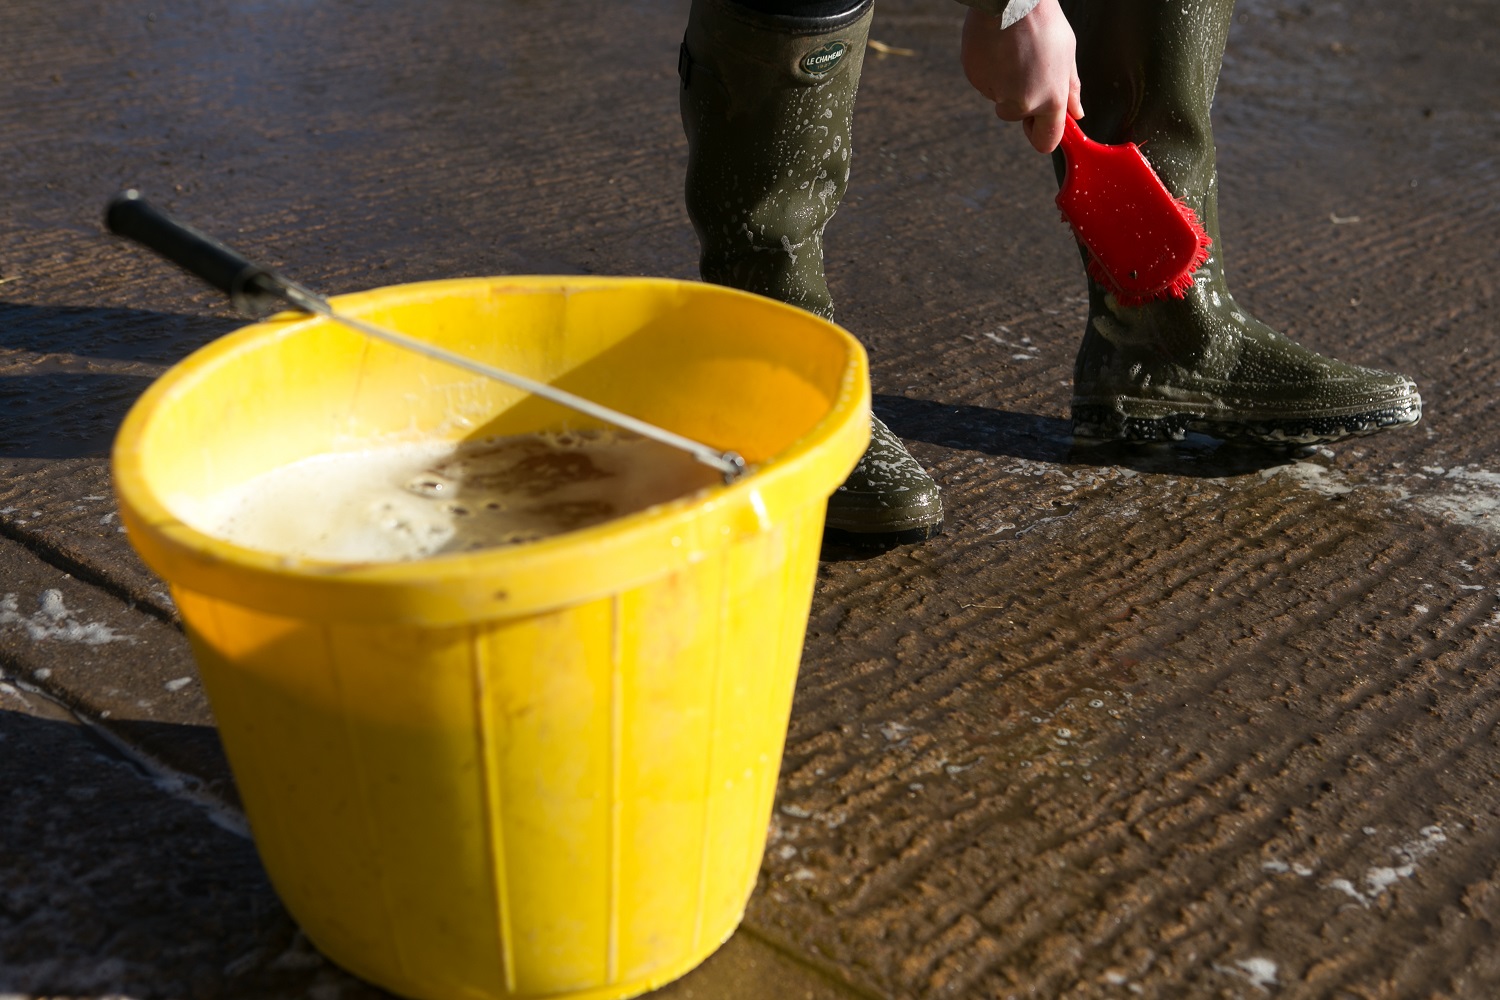 Yellow bucket full of disinfectant and someone cleaning their wellington boots with red brush